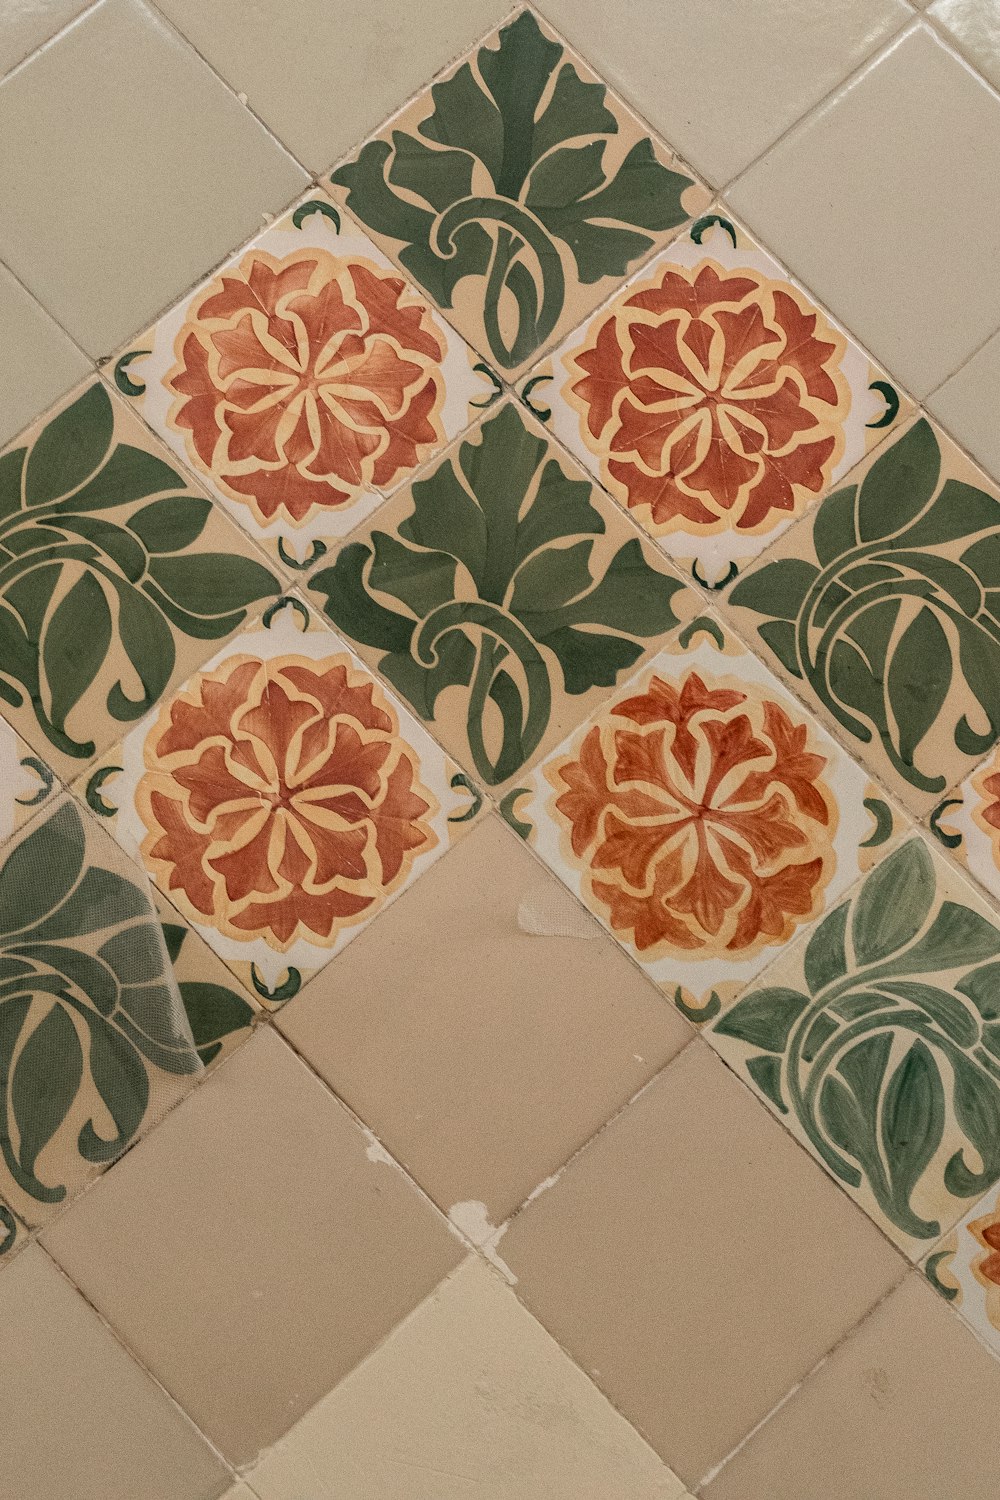 a tiled floor with a flower design on it